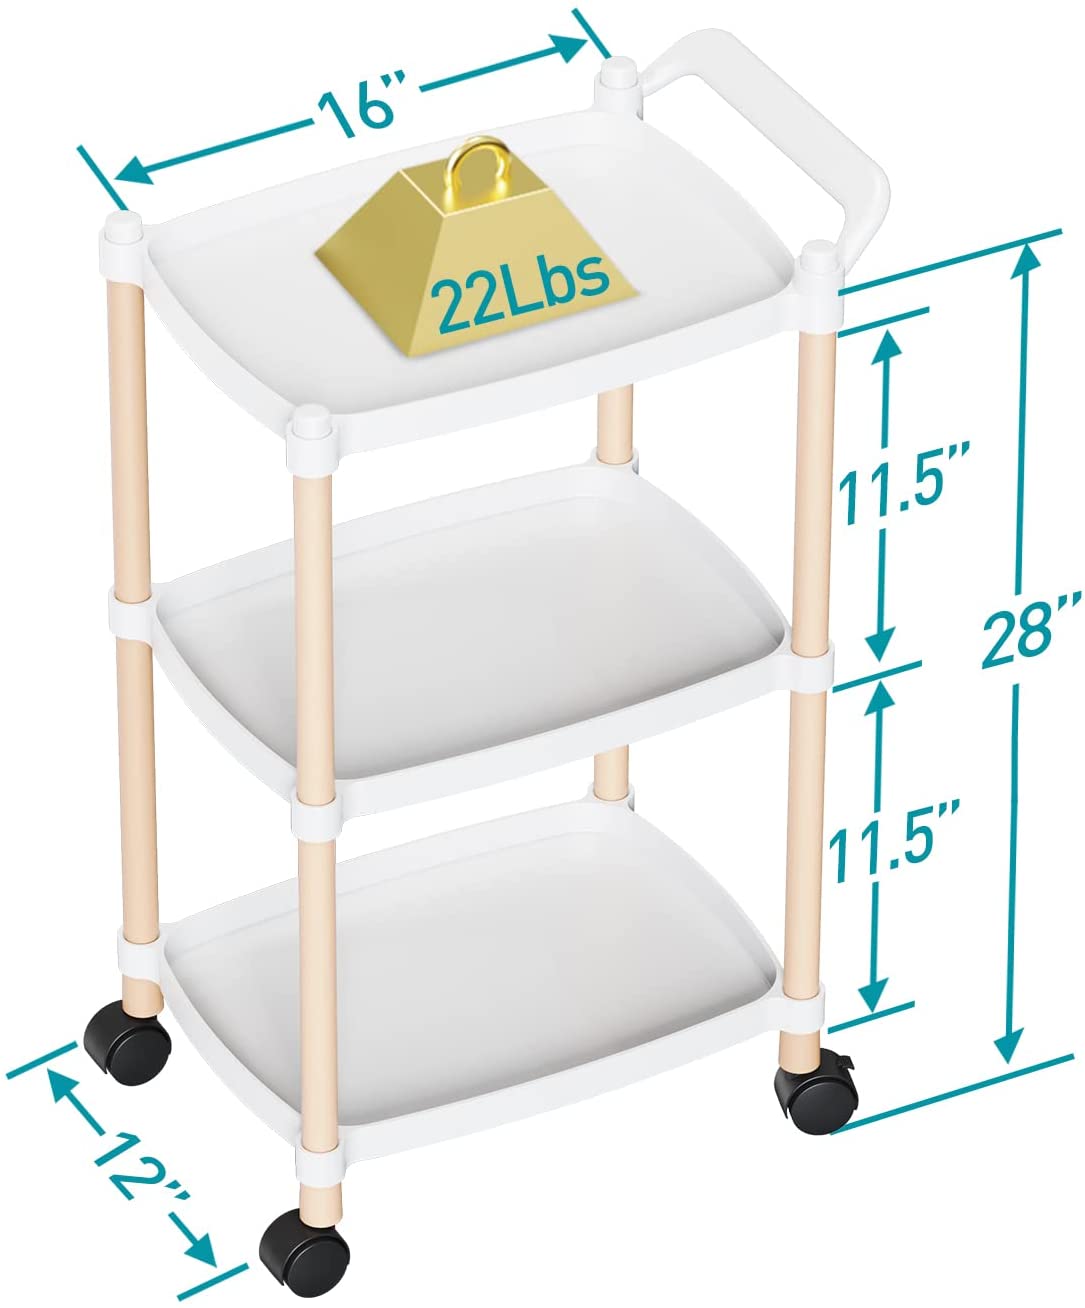 3 Tier Rolling Cart with Handle